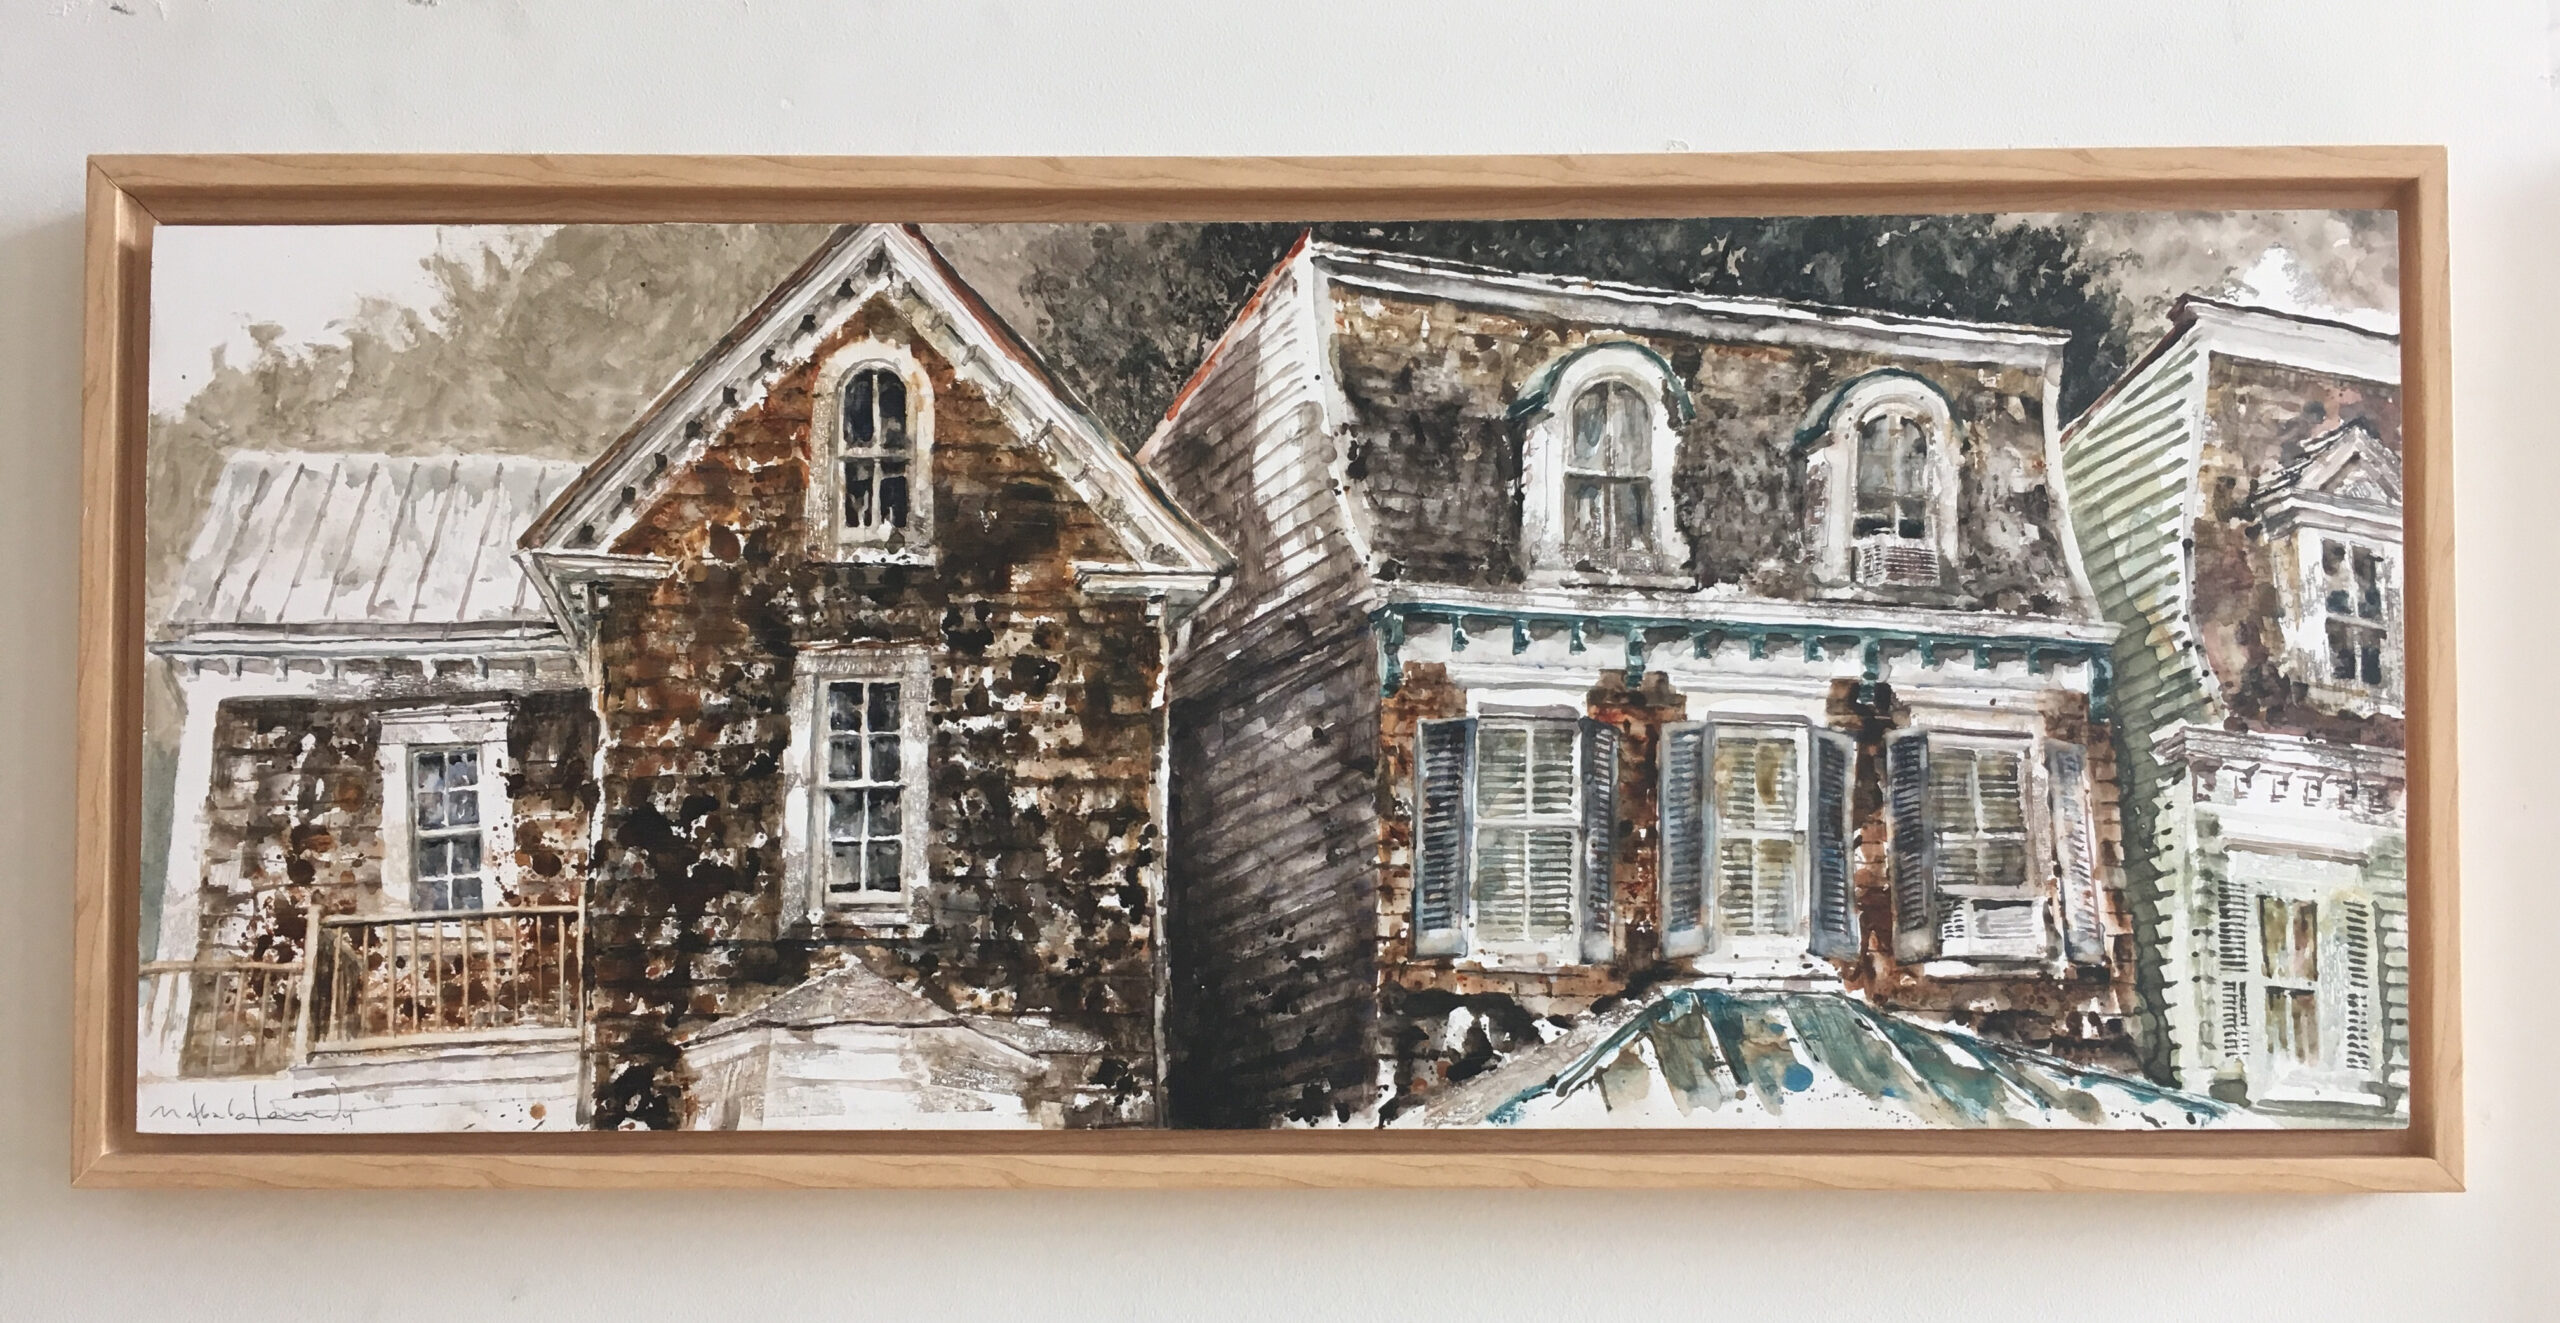 Mat Barber Kennedy, "Conduit Street, Annapolis," 2018, watercolor, 12 x 30 in. Collection the artist, Plein air